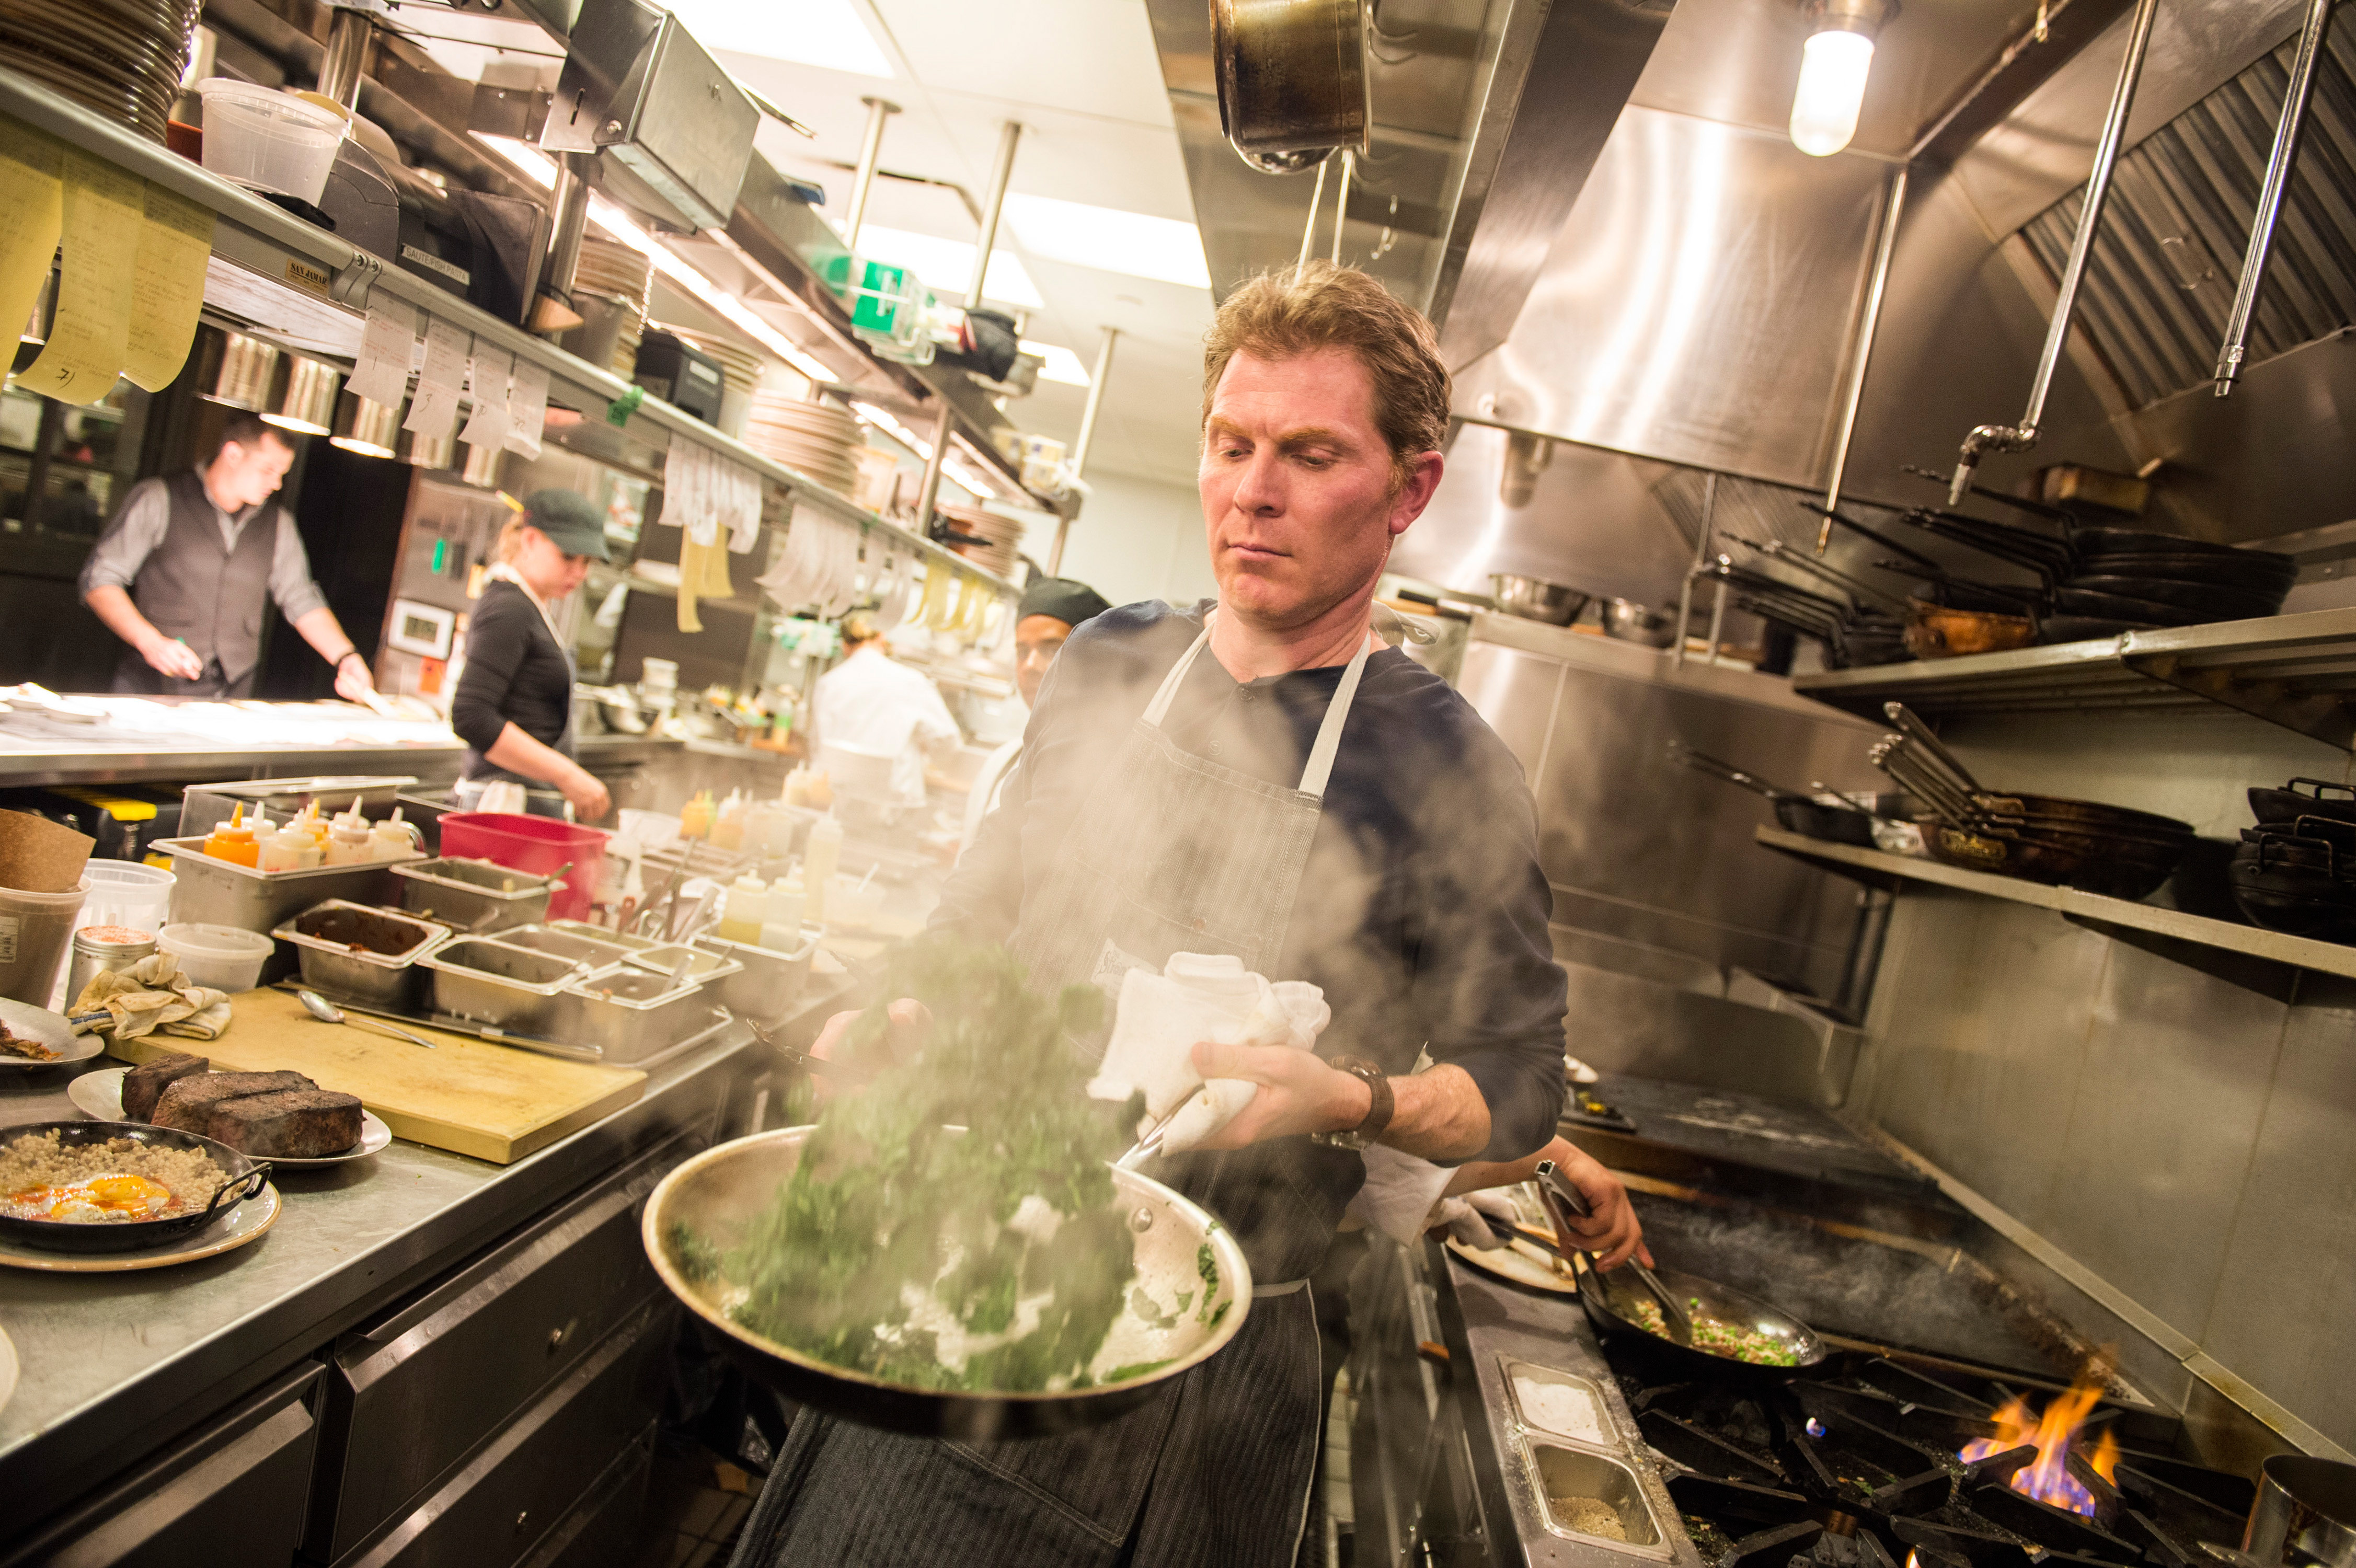 Bobby Flay works the line at Gato, his new restaurant, rated No. 9 on the New York Times' year-end list of the city's best new restaurants, on June 3, 2014.